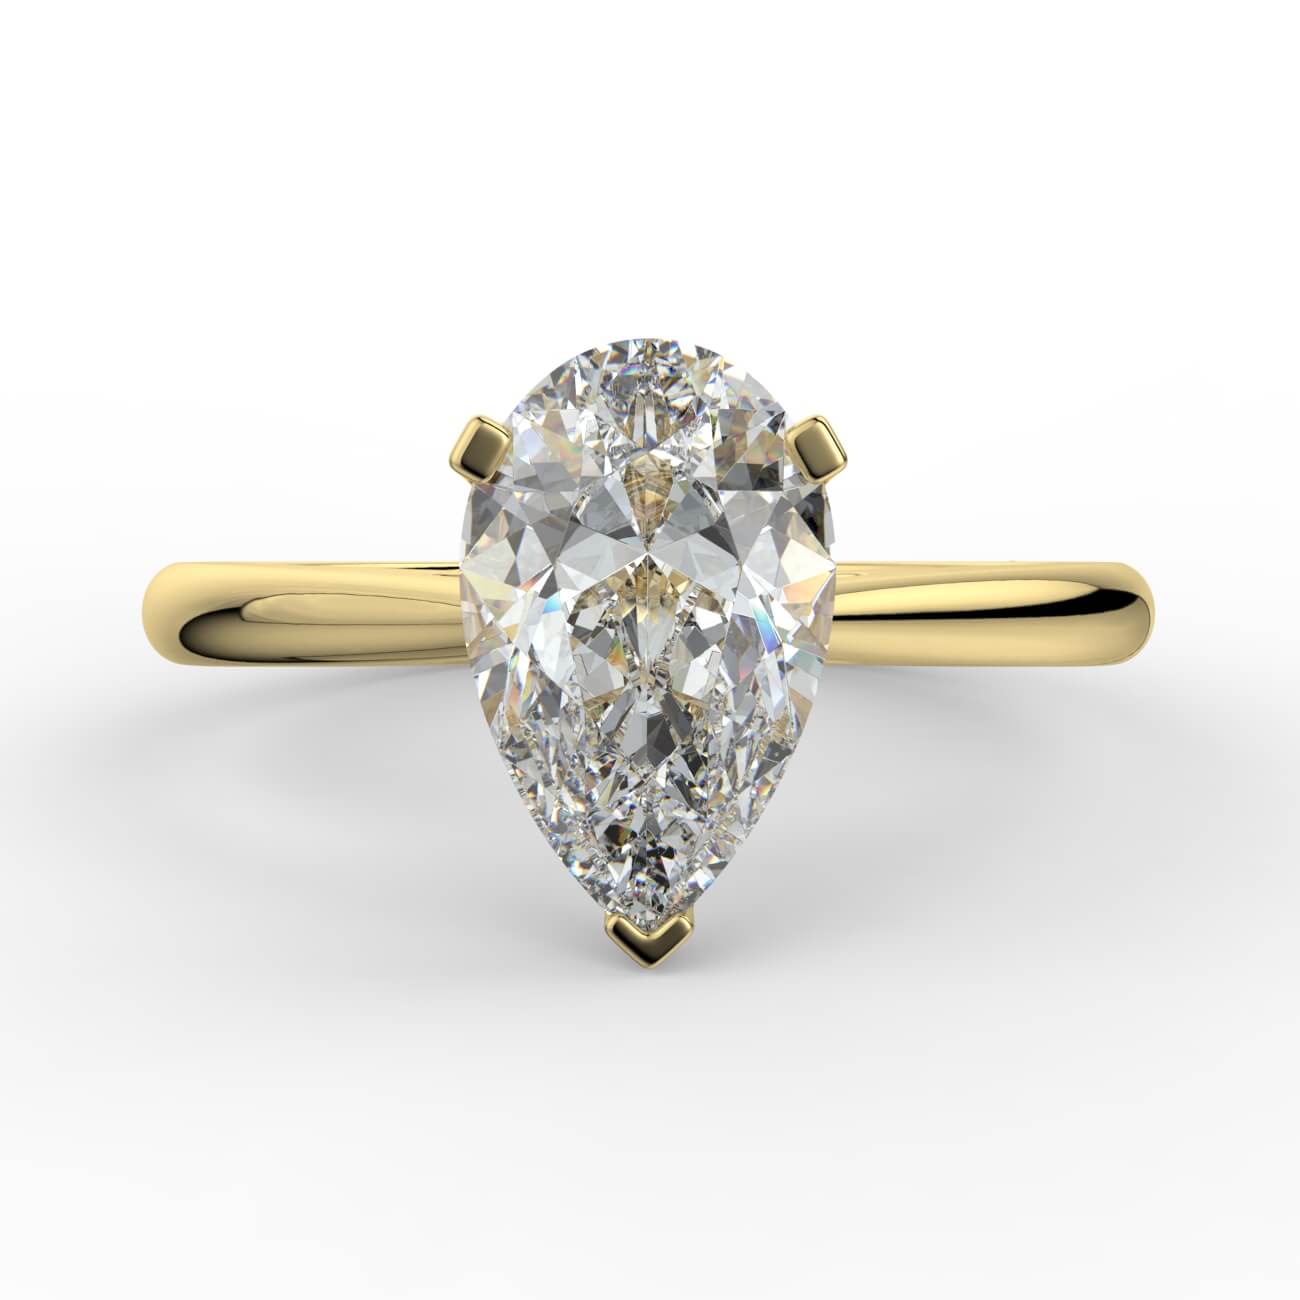 Pear cut diamond cathedral engagement ring in yellow gold – Australian Diamond Network